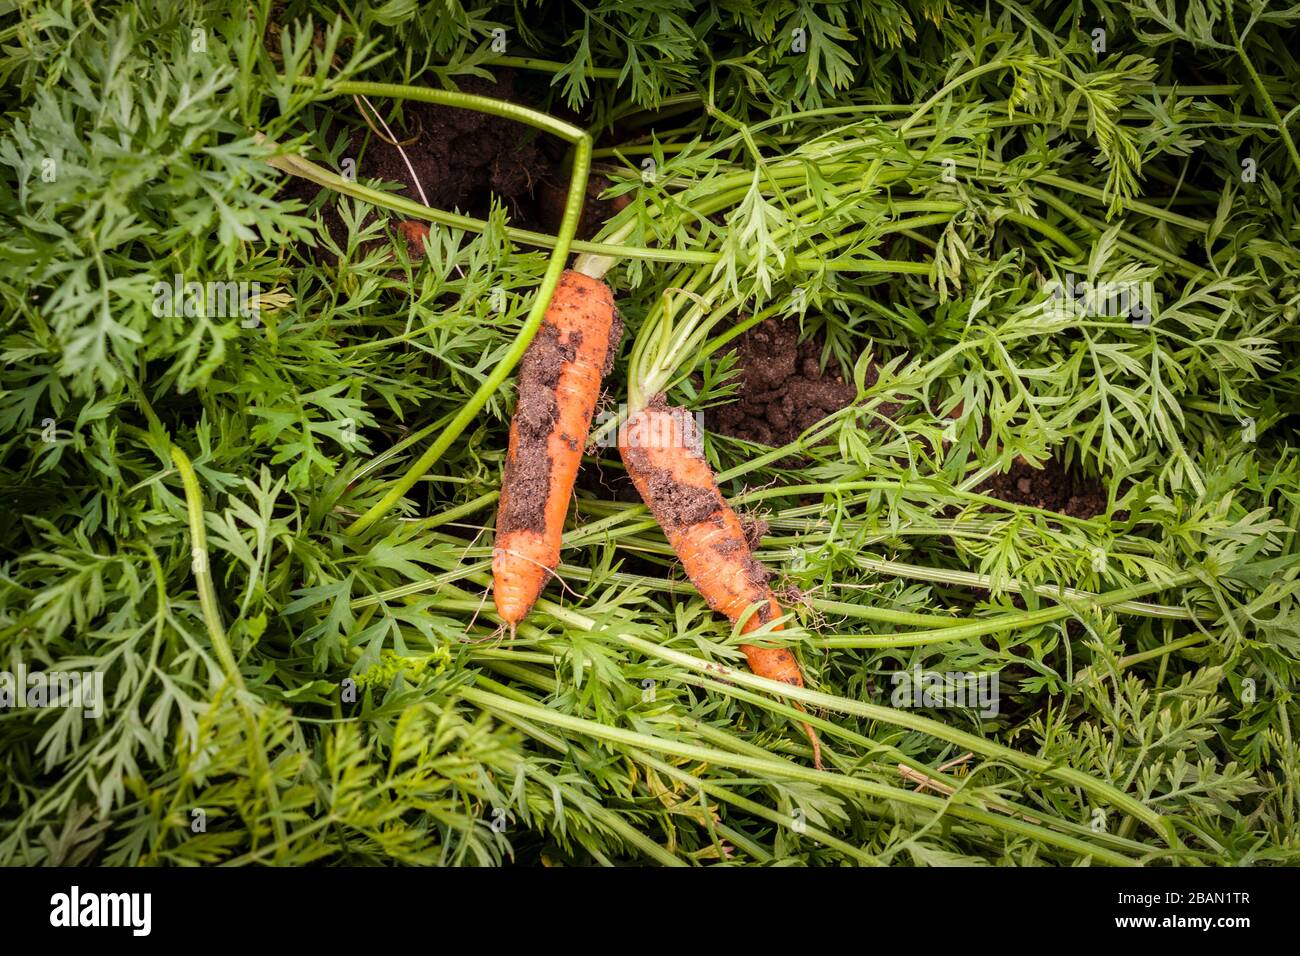 Carrots, Daucus carota subsp. sativus with soil, freshly harvested among carrot leaves. Stock Photo